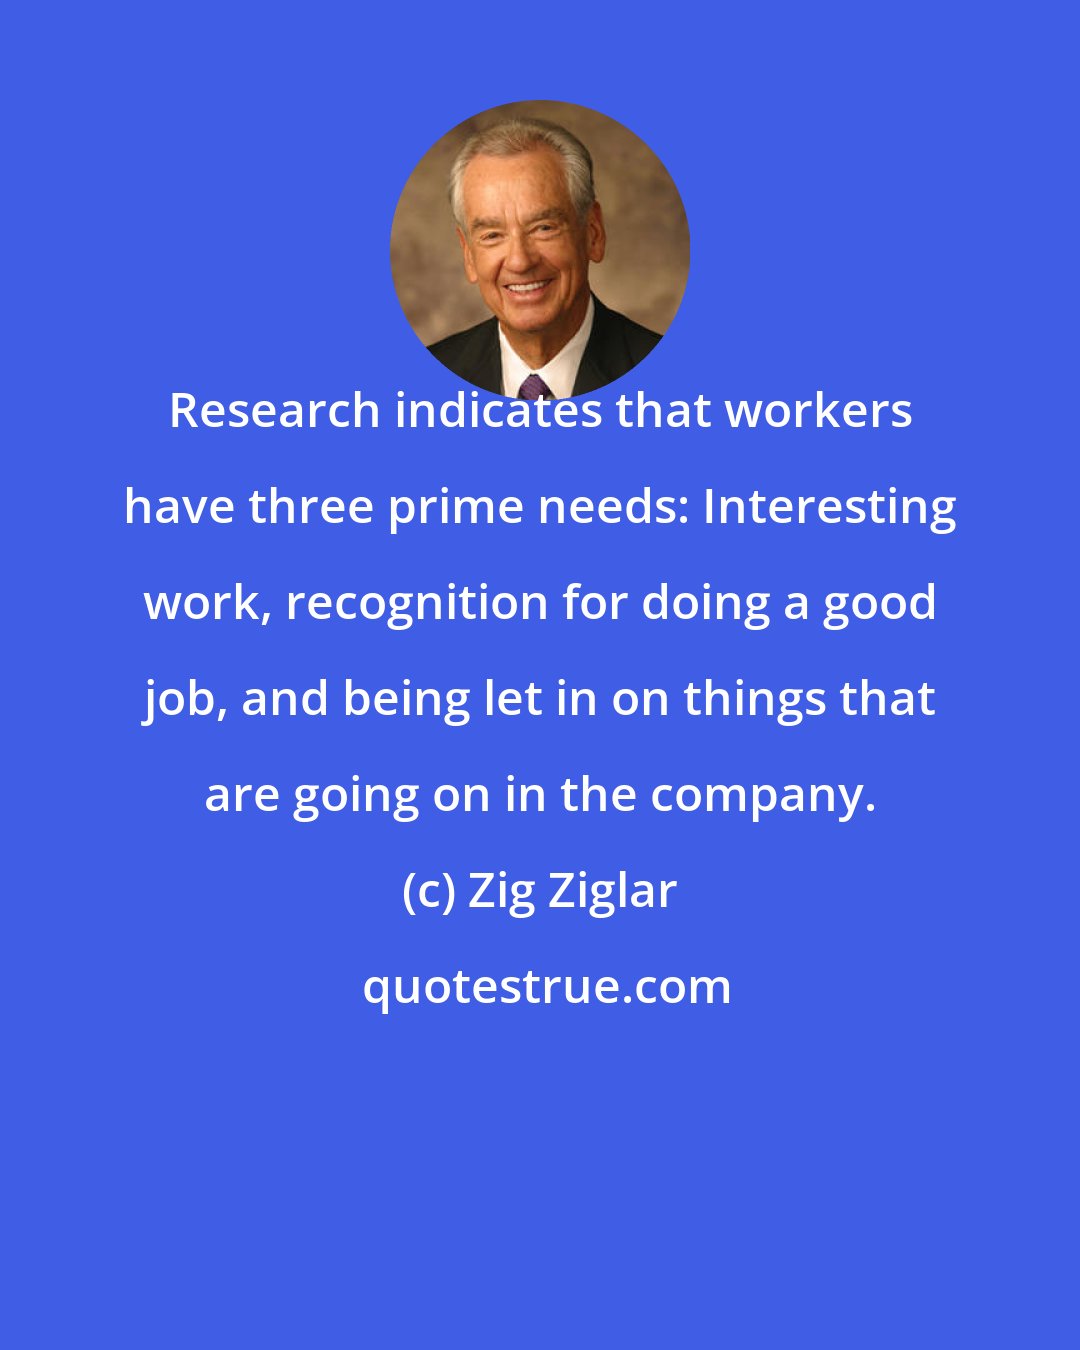 Zig Ziglar: Research indicates that workers have three prime needs: Interesting work, recognition for doing a good job, and being let in on things that are going on in the company.